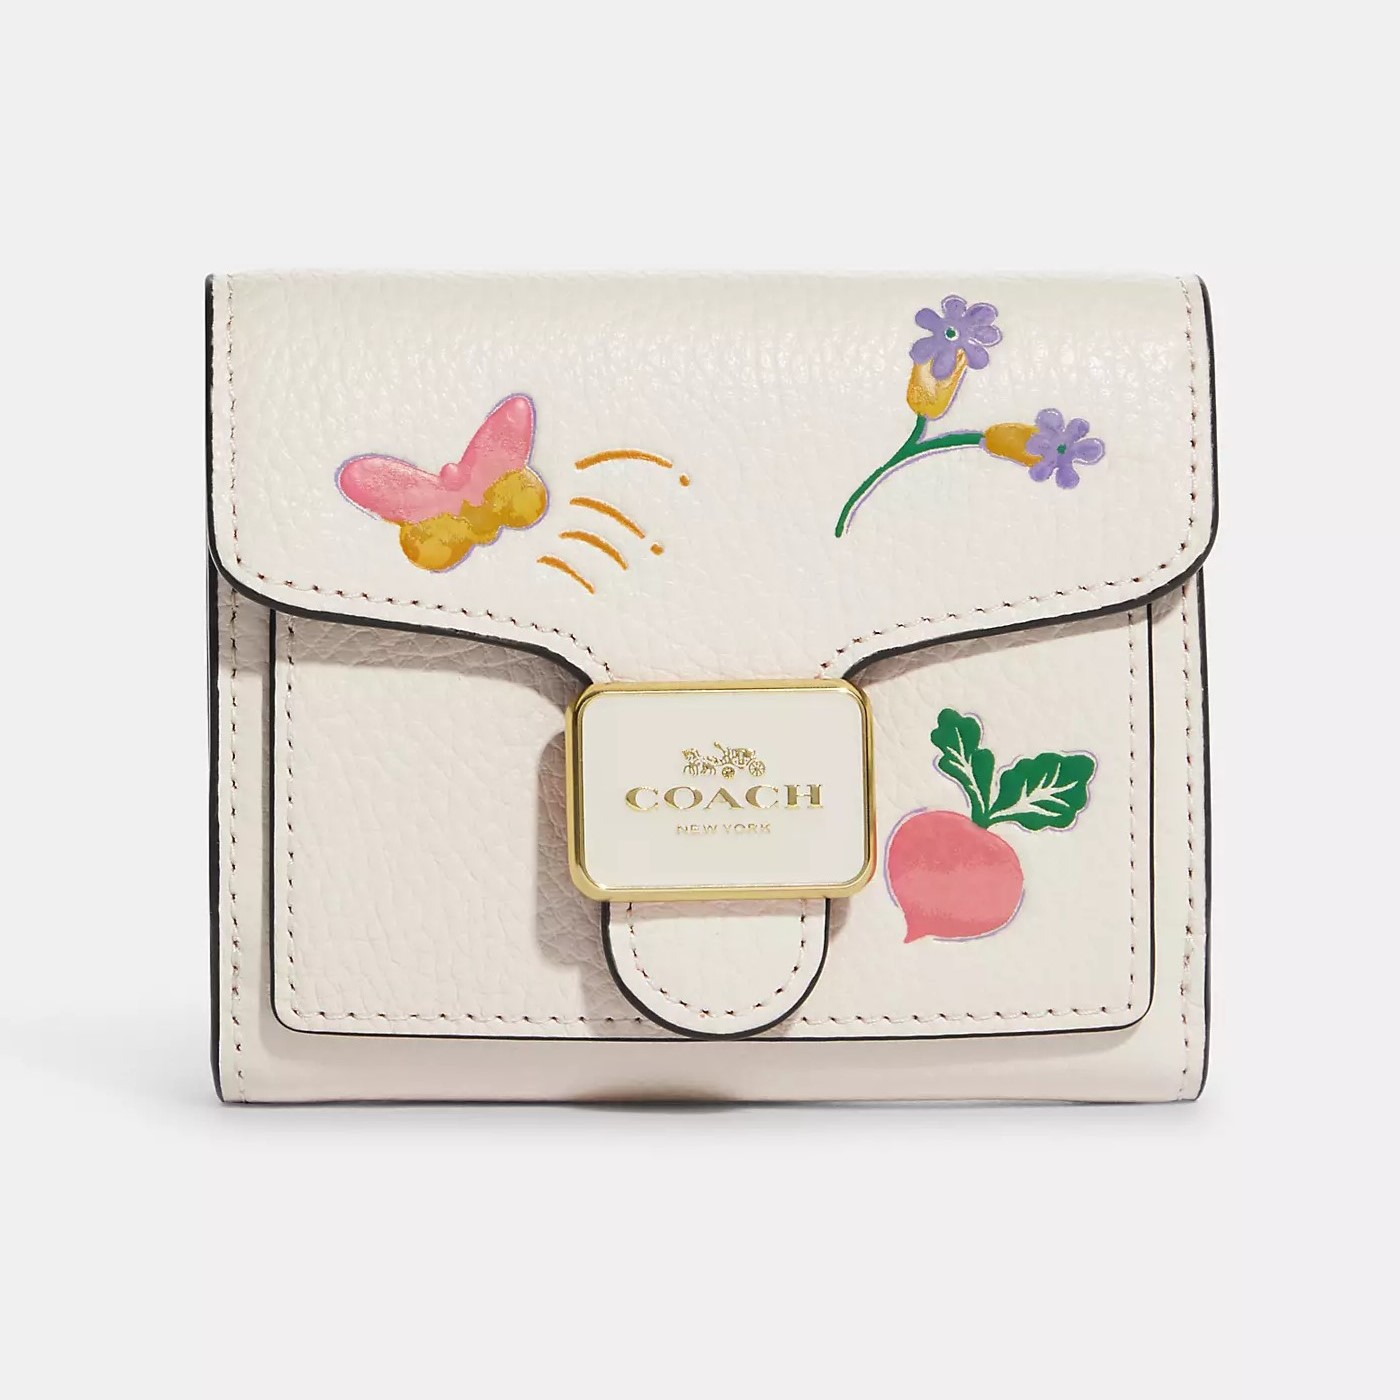 VÍ CẦM TAY COACH NỮ PEPPER WALLET WITH DREAMY VEGGIE PRINT REFINED PEBBLE LEATHER C8727 3